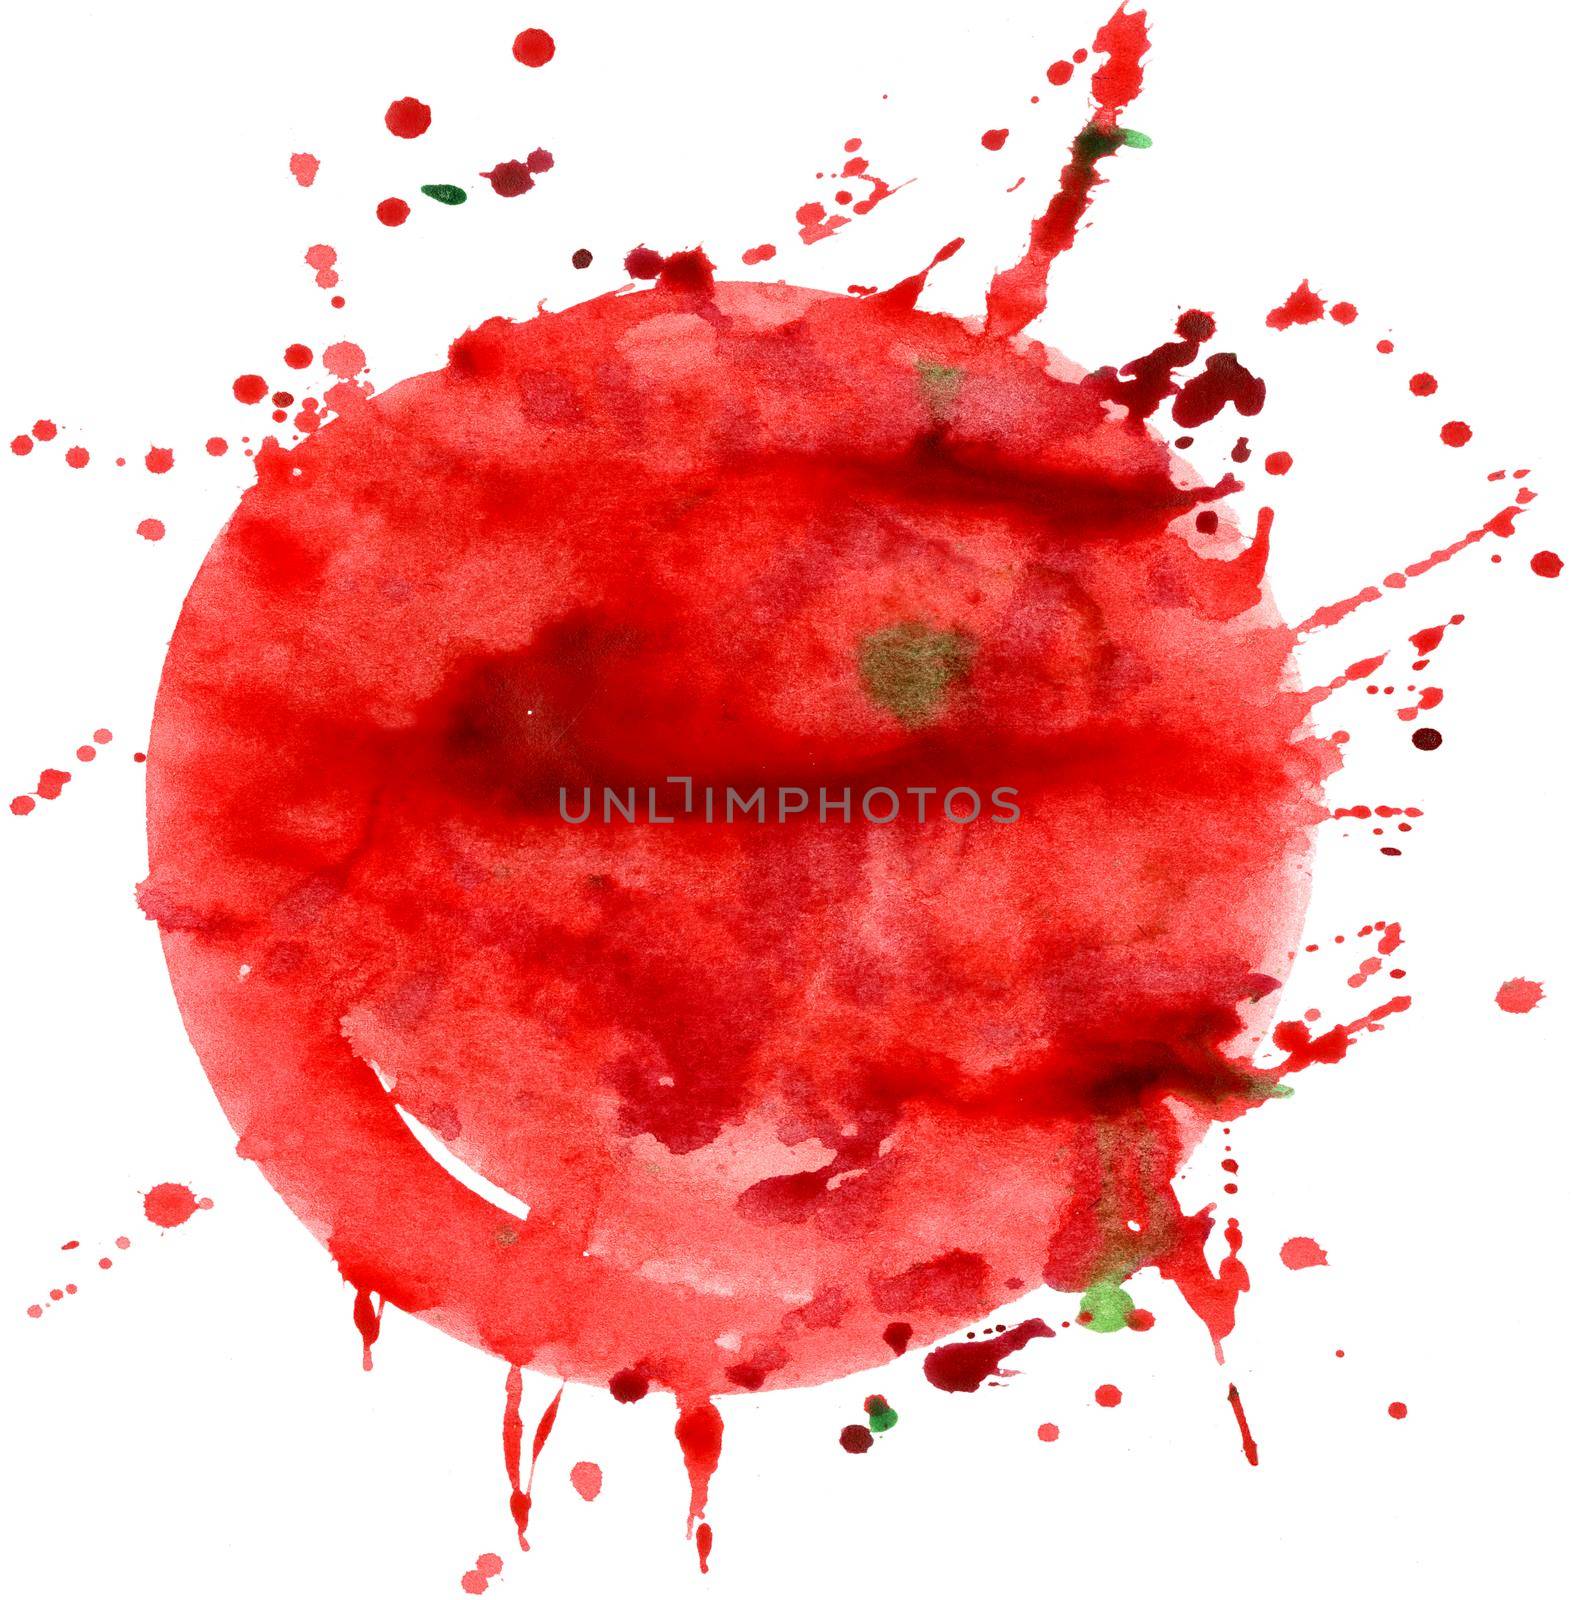 Red watercolor circle isolated on white background